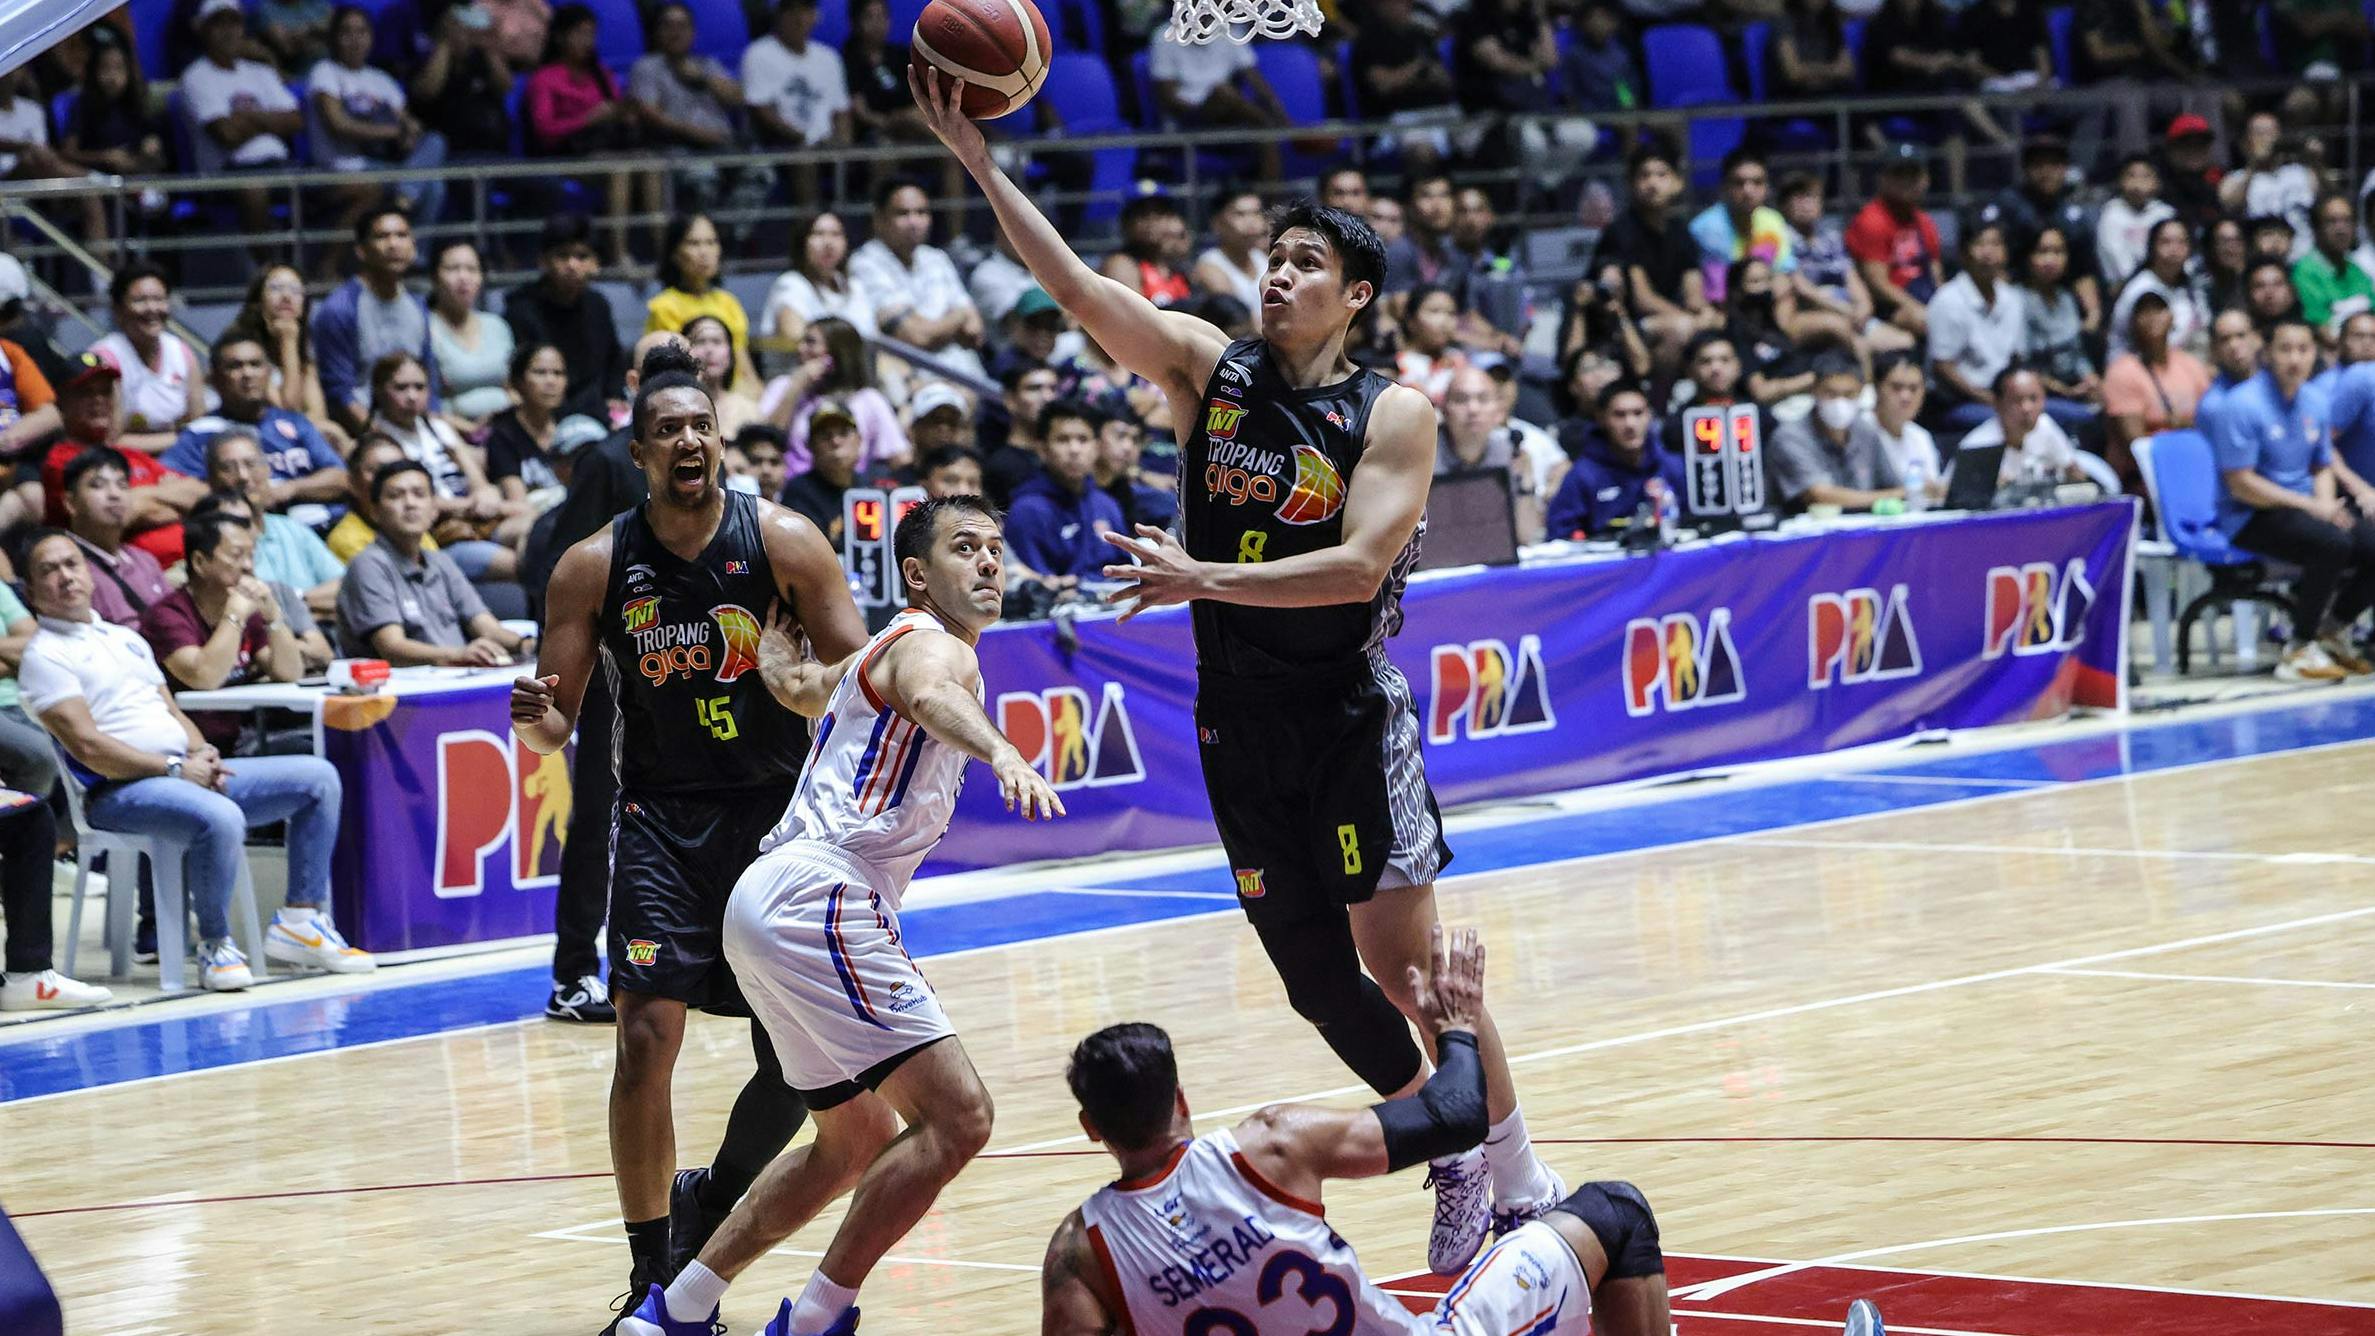 PBA: Calvin Oftana ties career-high with 37 points as TNT edges NLEX for back-to-back wins